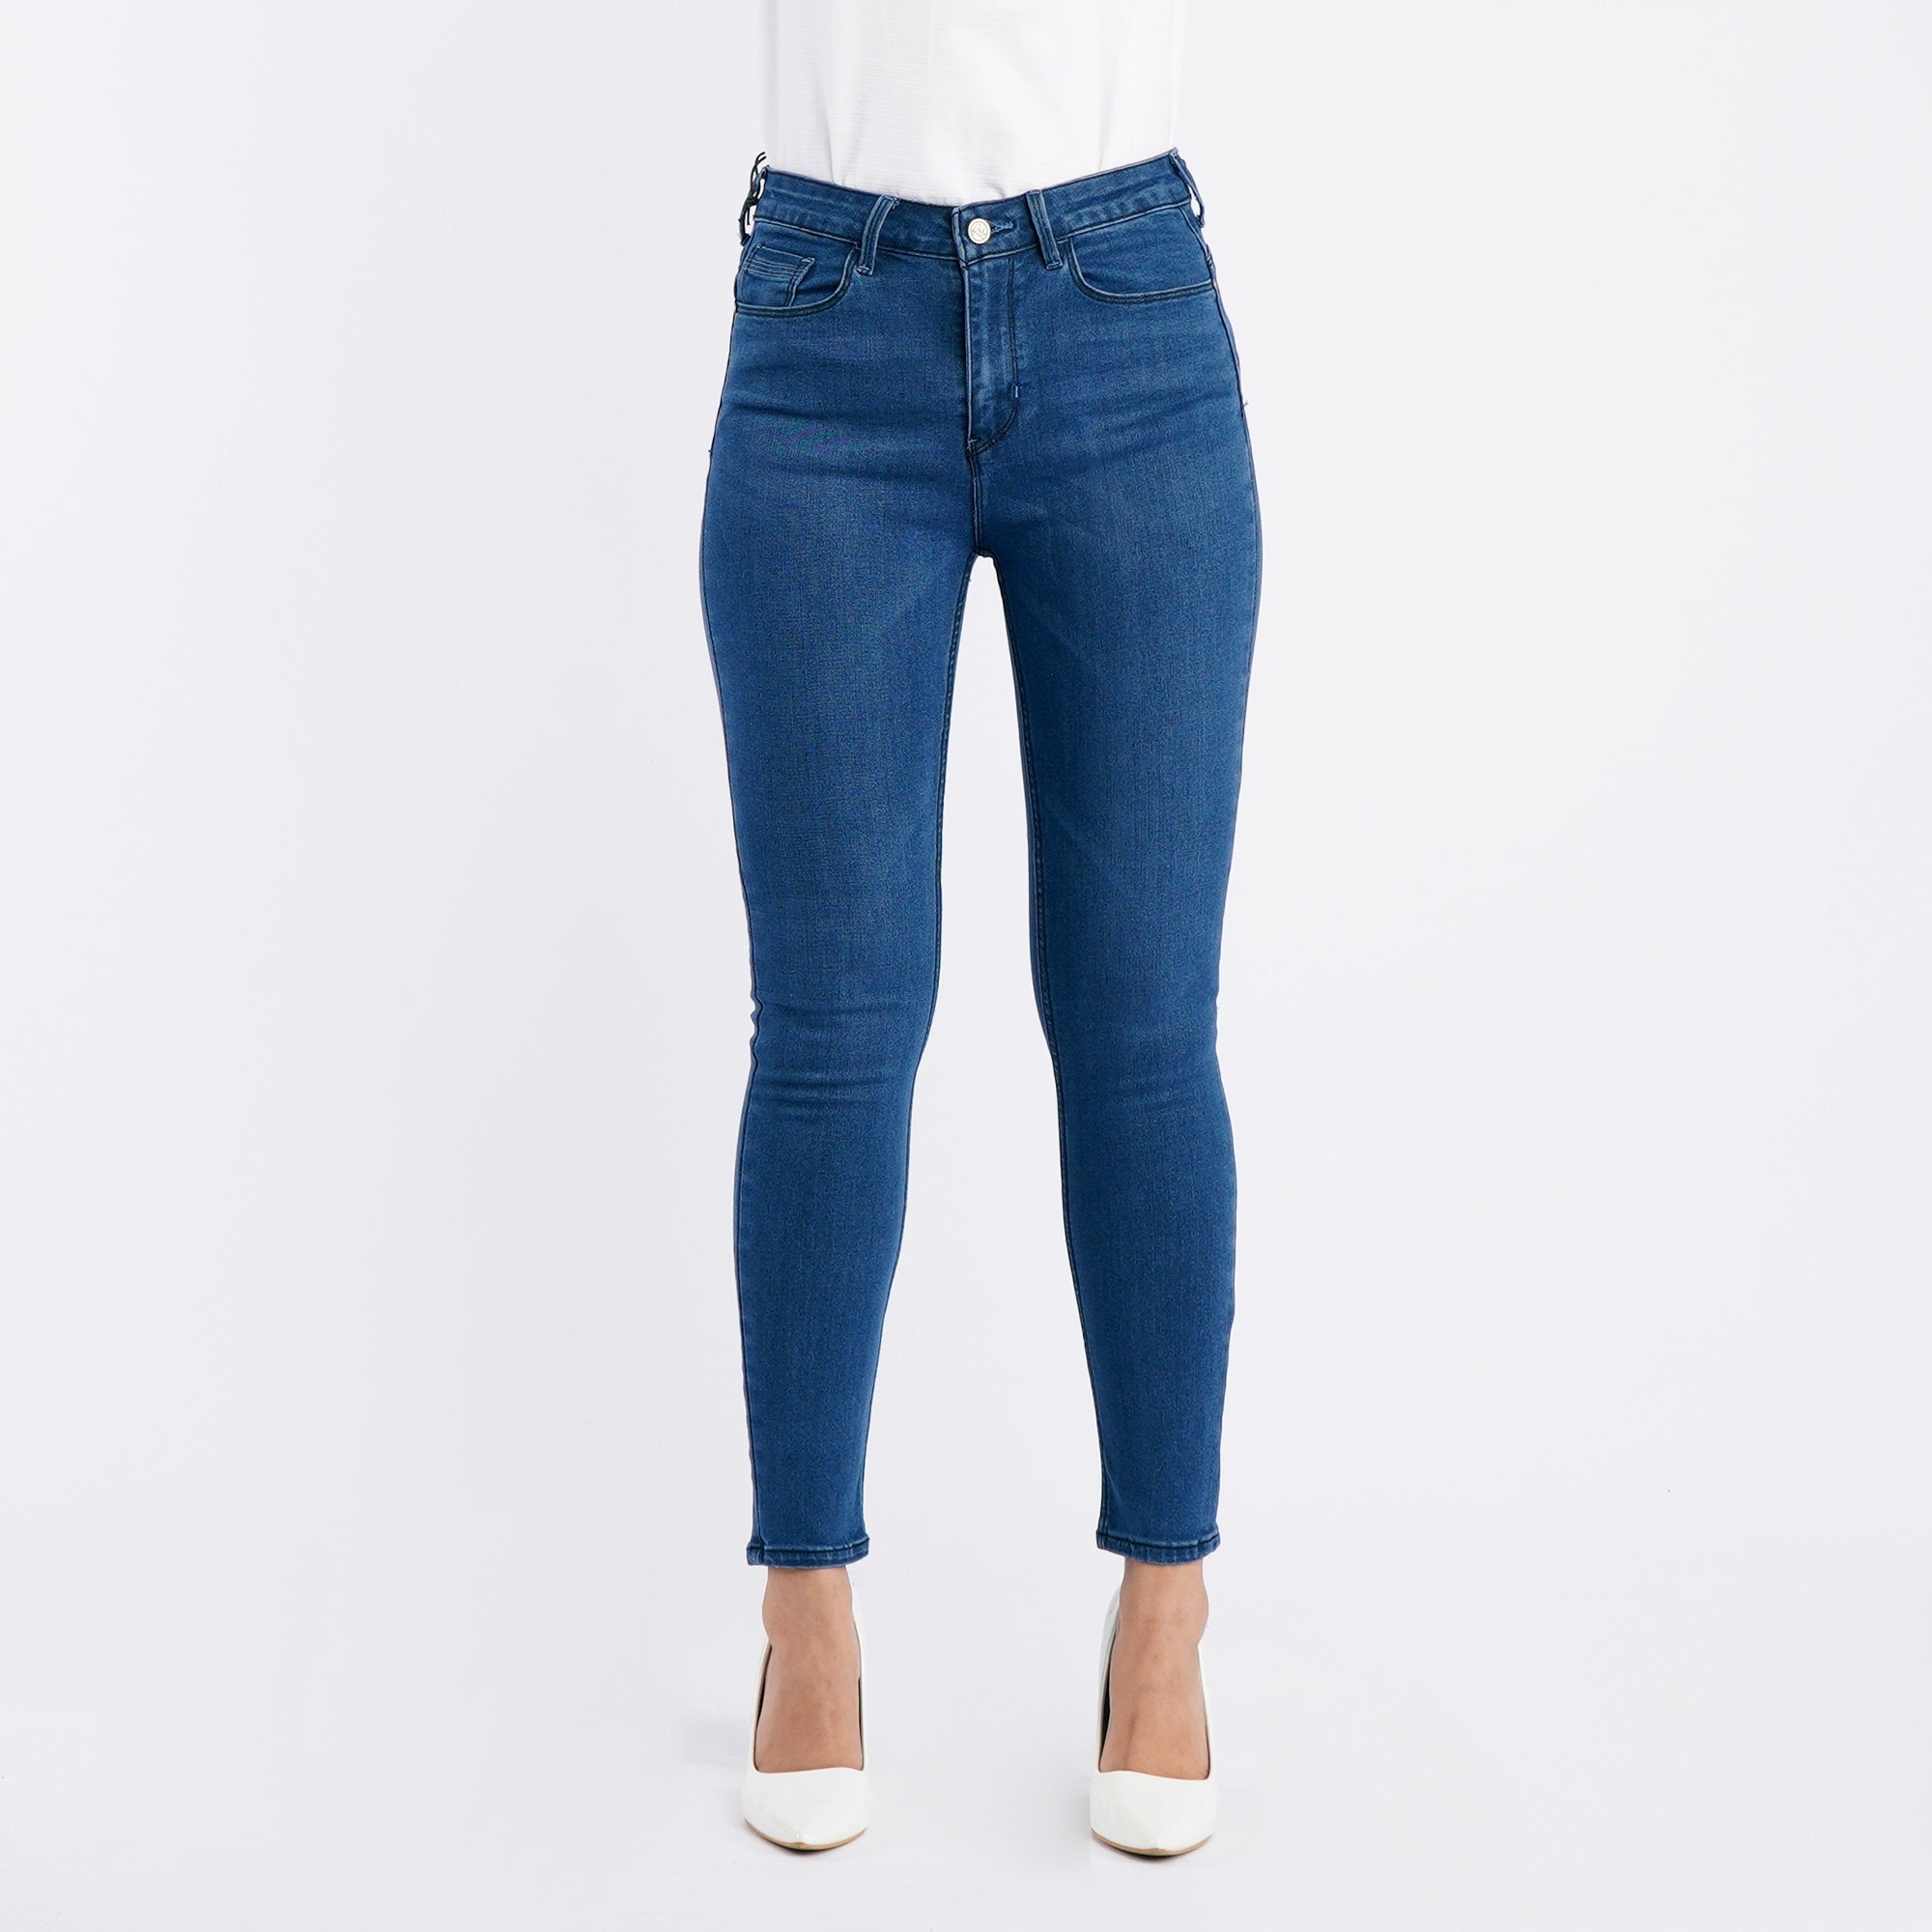 Amazon.com: Bell Bottom Jeans for Women High Waisted Jean with Classic Wide  Leg Ripped Denim Pants Slim Fit Washed Long Pants Blue : Sports & Outdoors